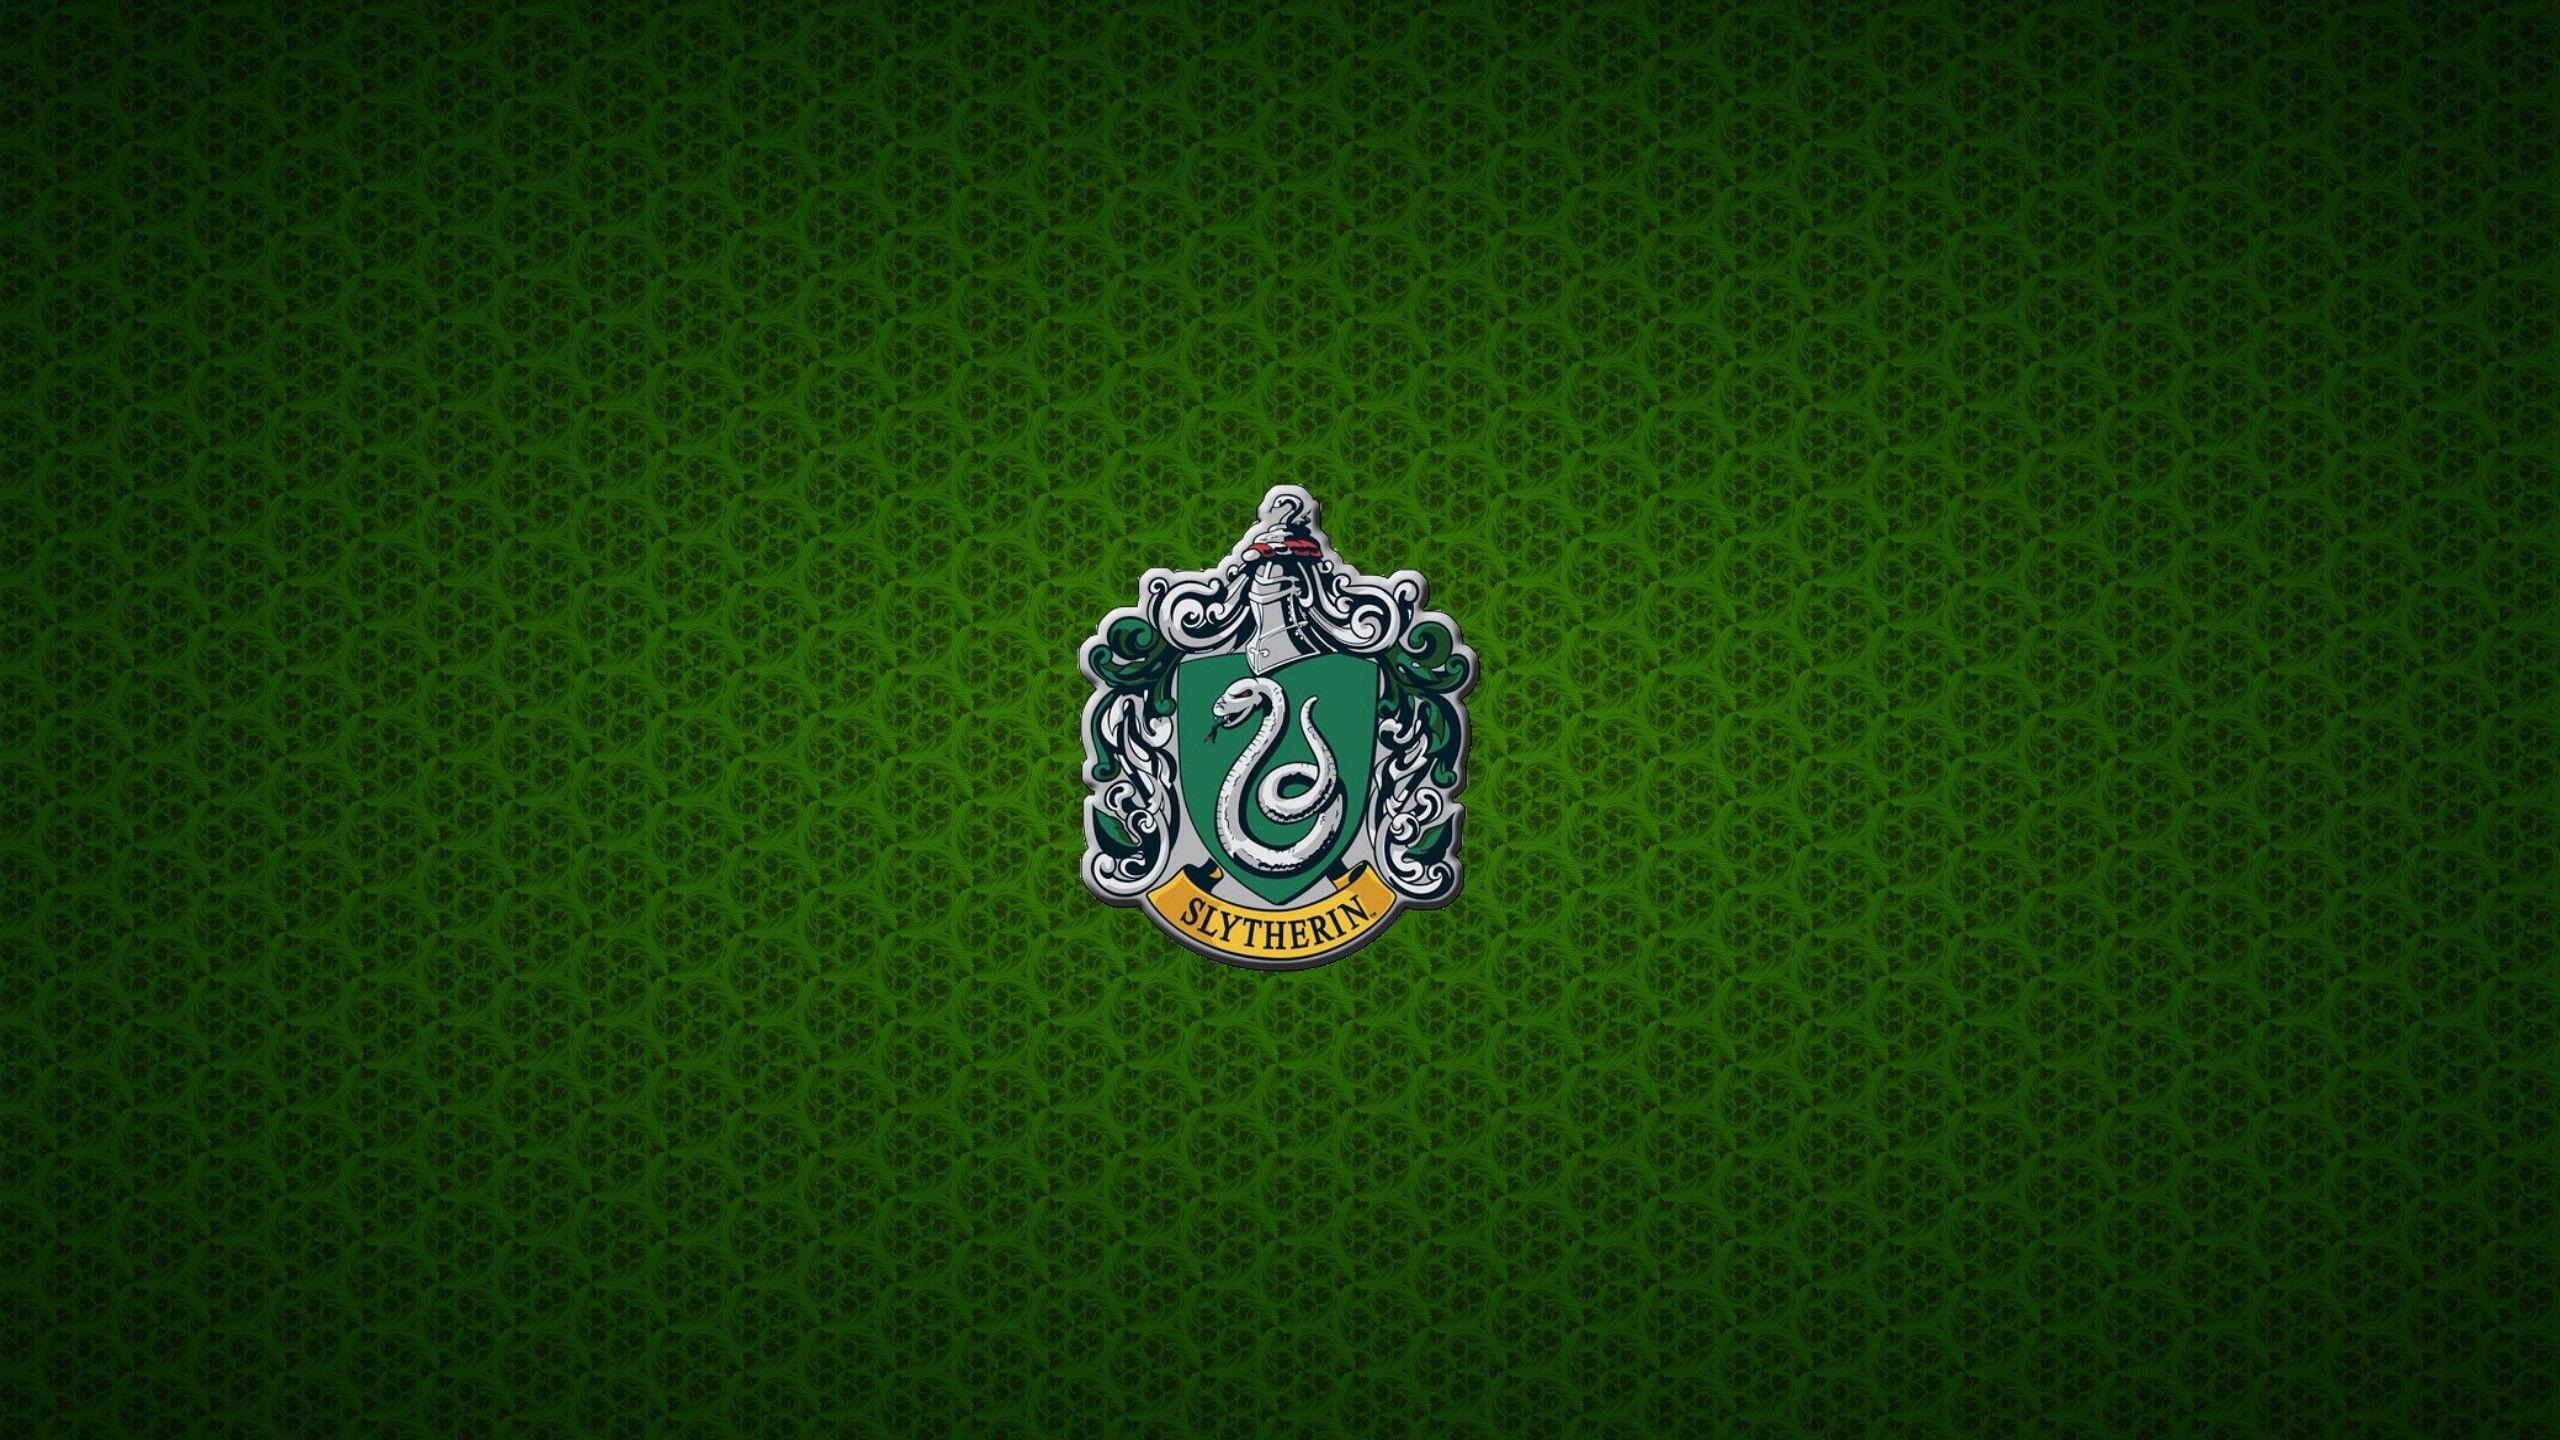 Slytherin wallpapers ·① Download free stunning wallpapers for